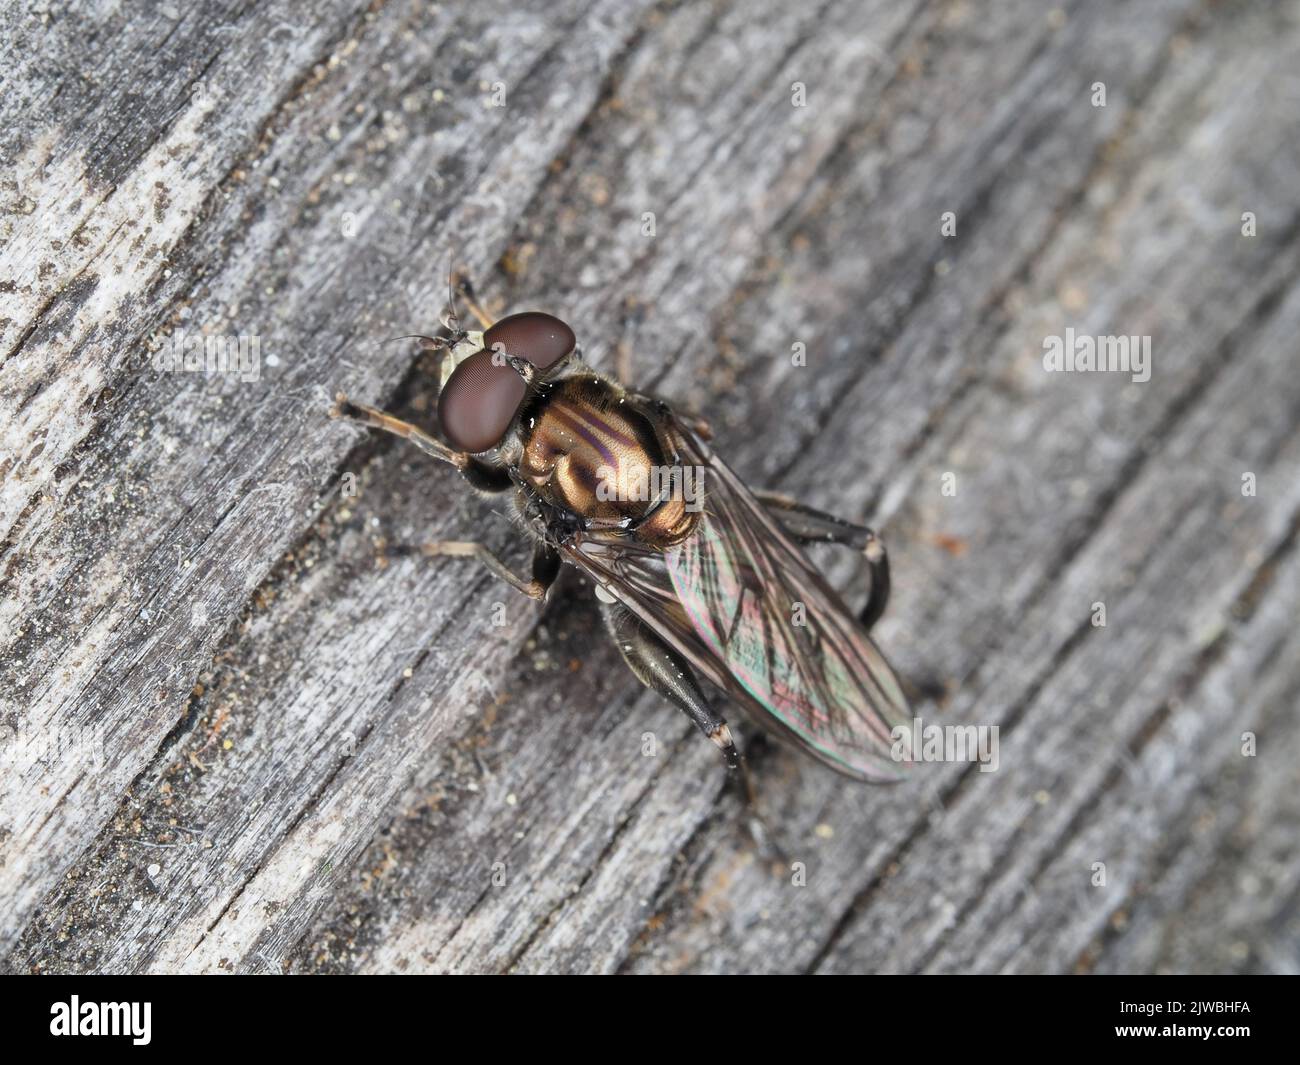 Macro photo of Chalcosyrphus sp. fly on a wooden surface Stock Photo